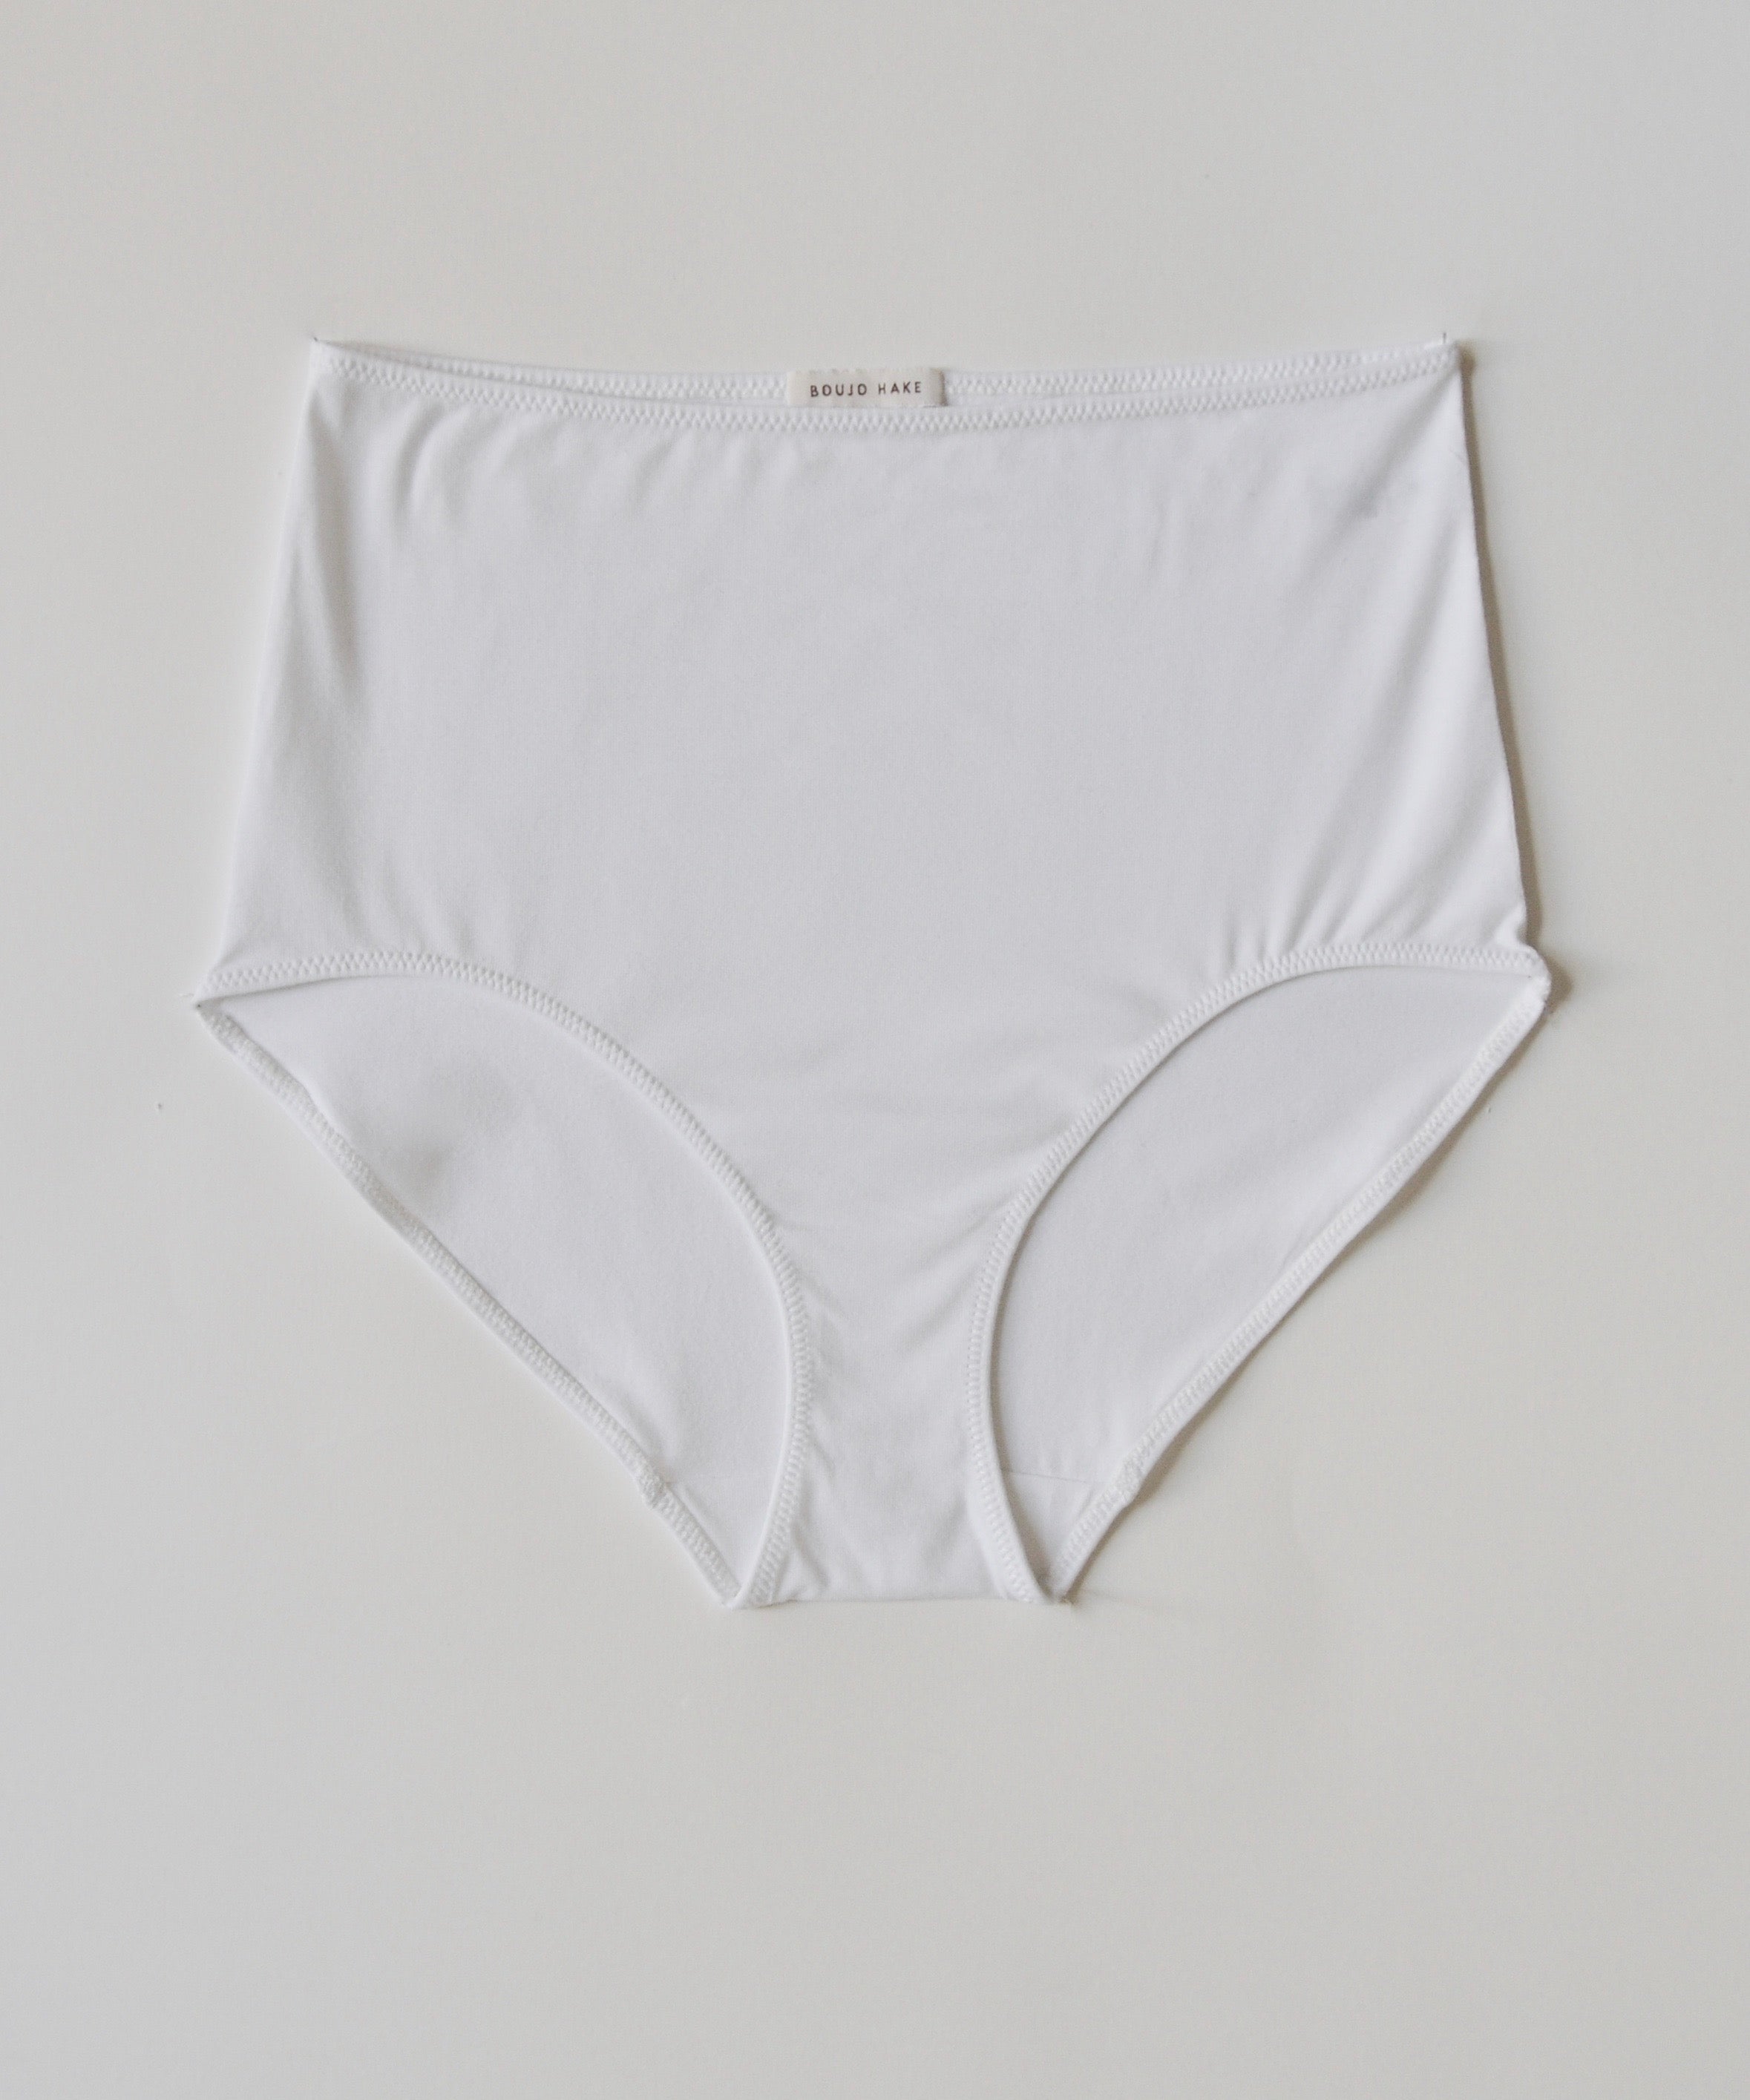 Granny panties: how high-waisted underwear made a huge comeback - Vox